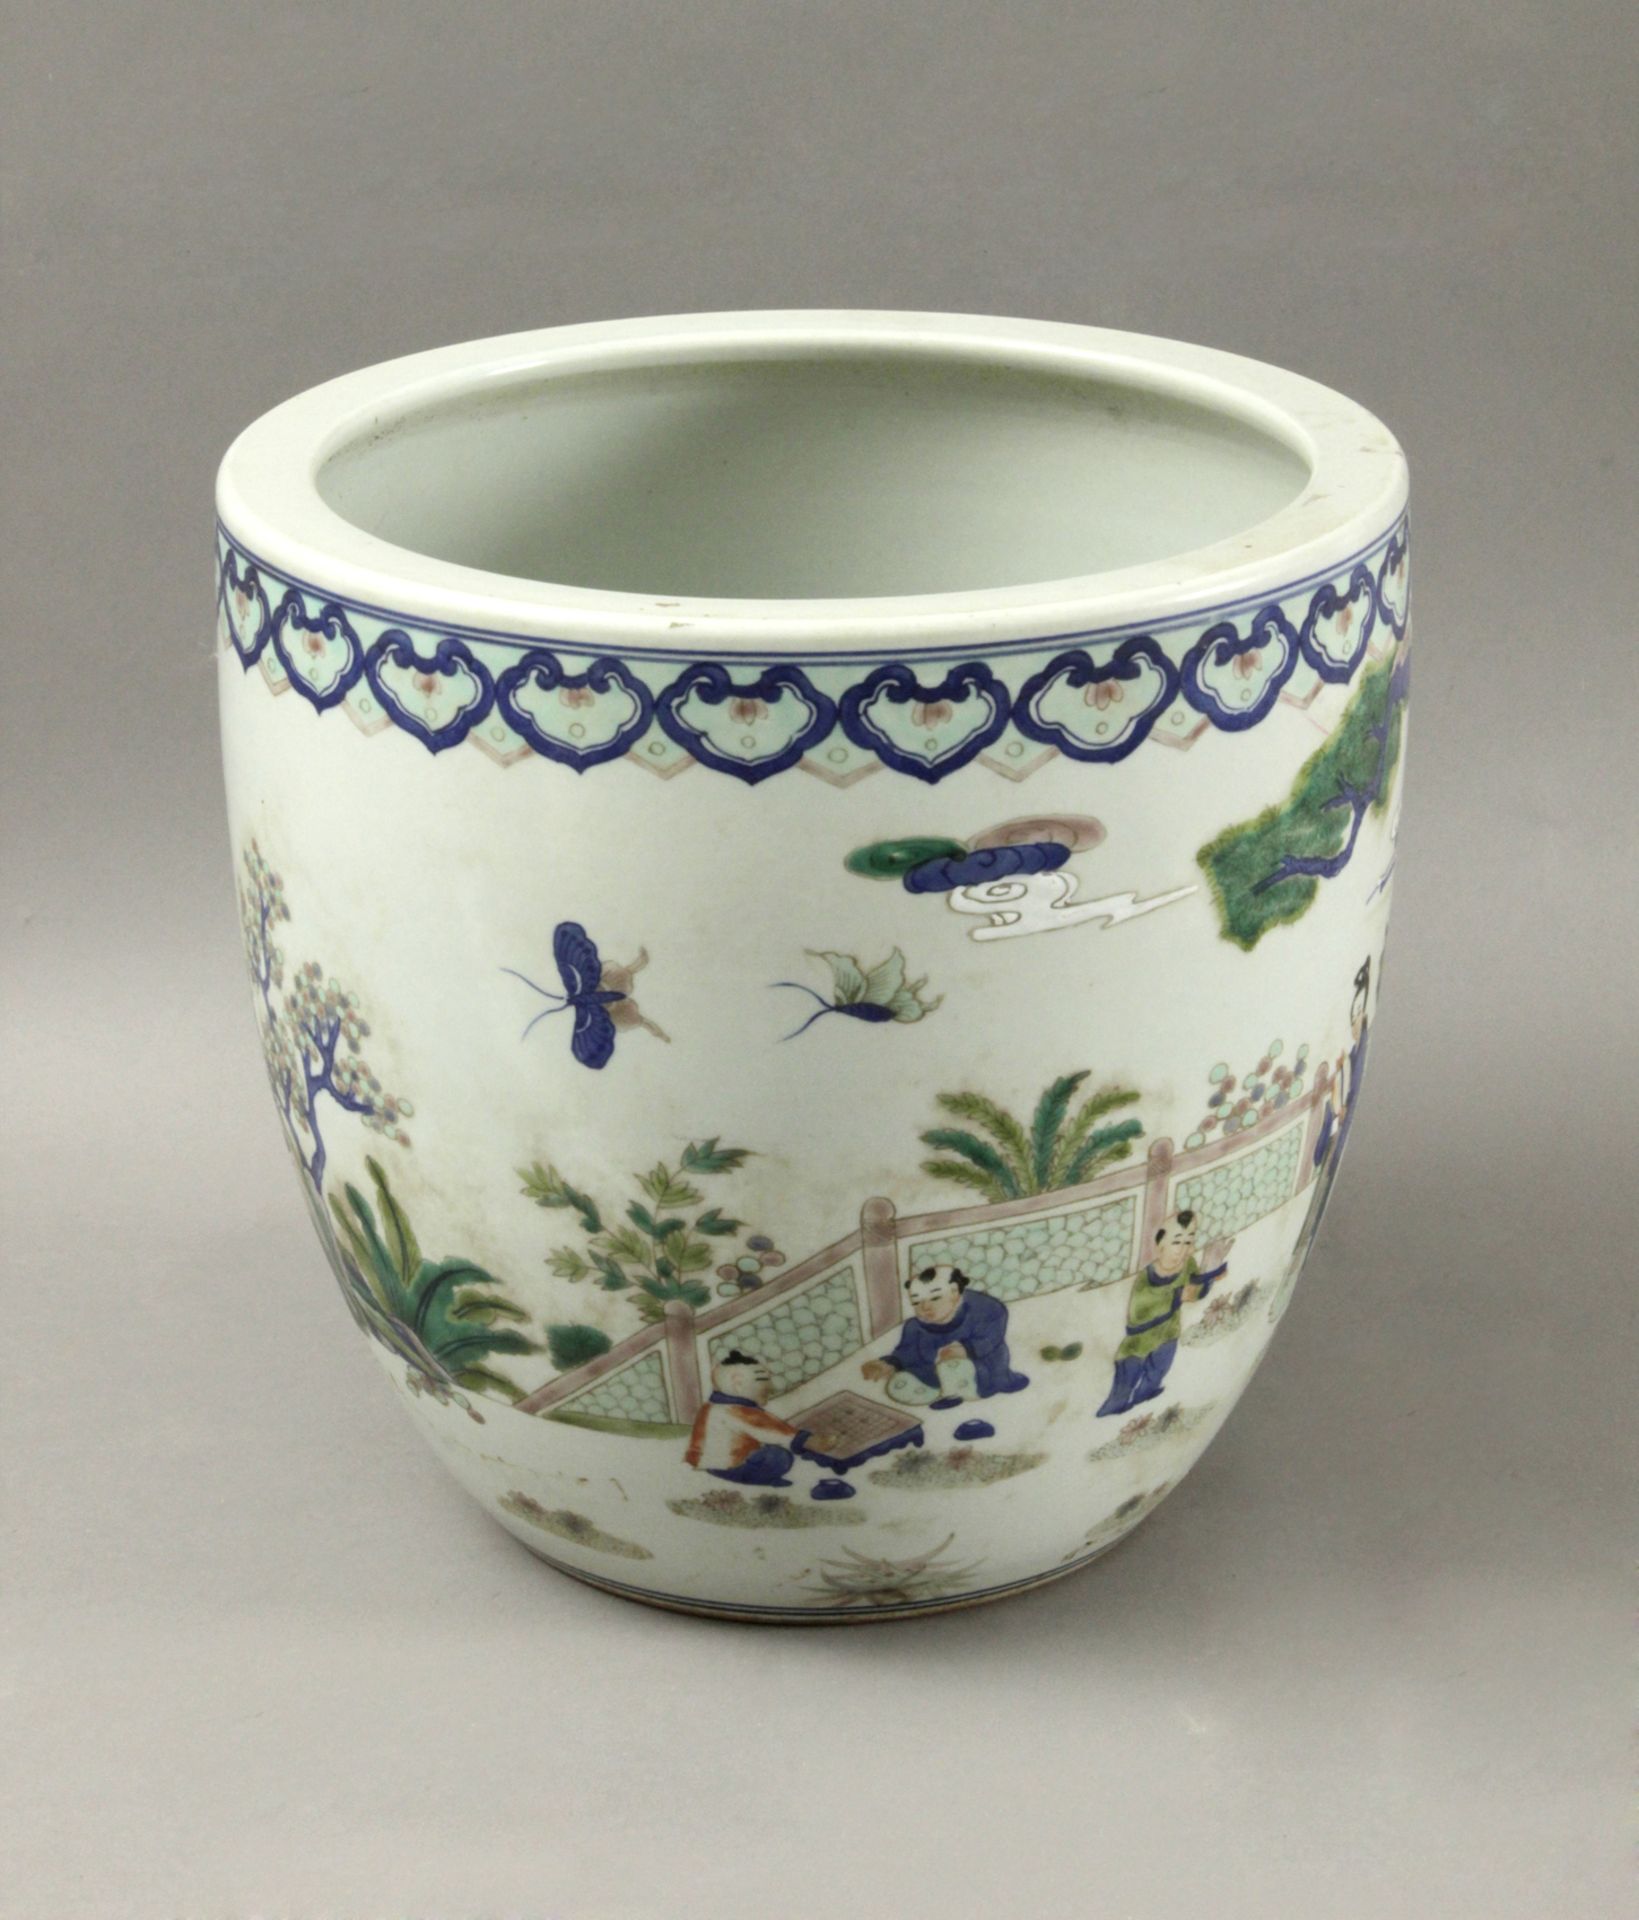 20th century Chinese cache-pot in porcelain - Image 3 of 3